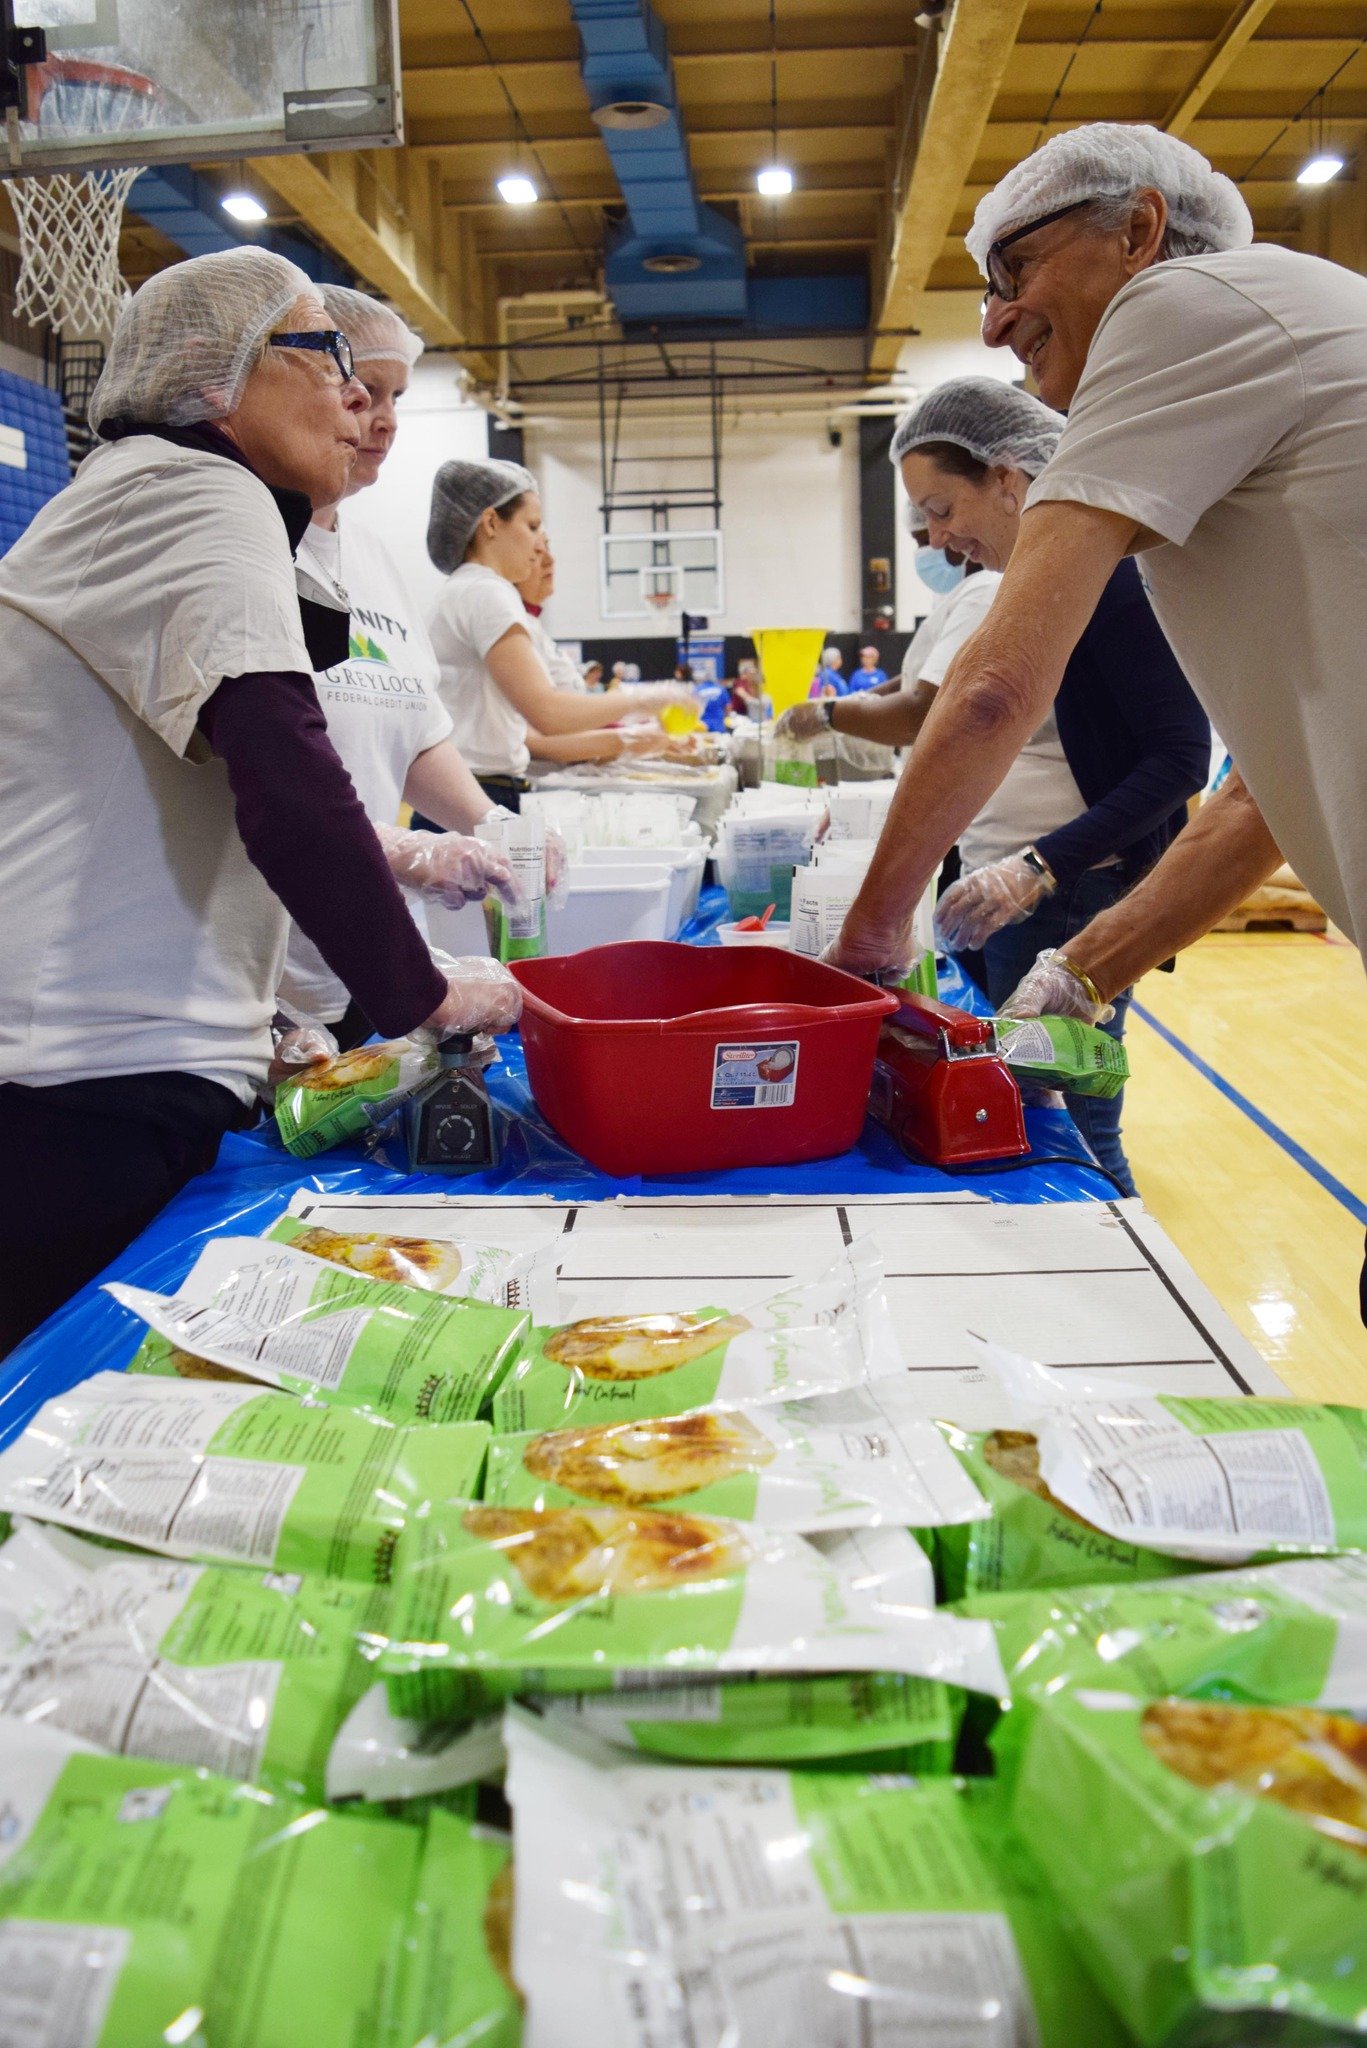 On Saturday, April 20th, Team Berkshire Bounty gathered with several other organizations for the Meals for Good event. Collectively we created, measured, and packed 40,000 servings of nutritious, ready to eat meals, a total of 6,072 lbs of food. This